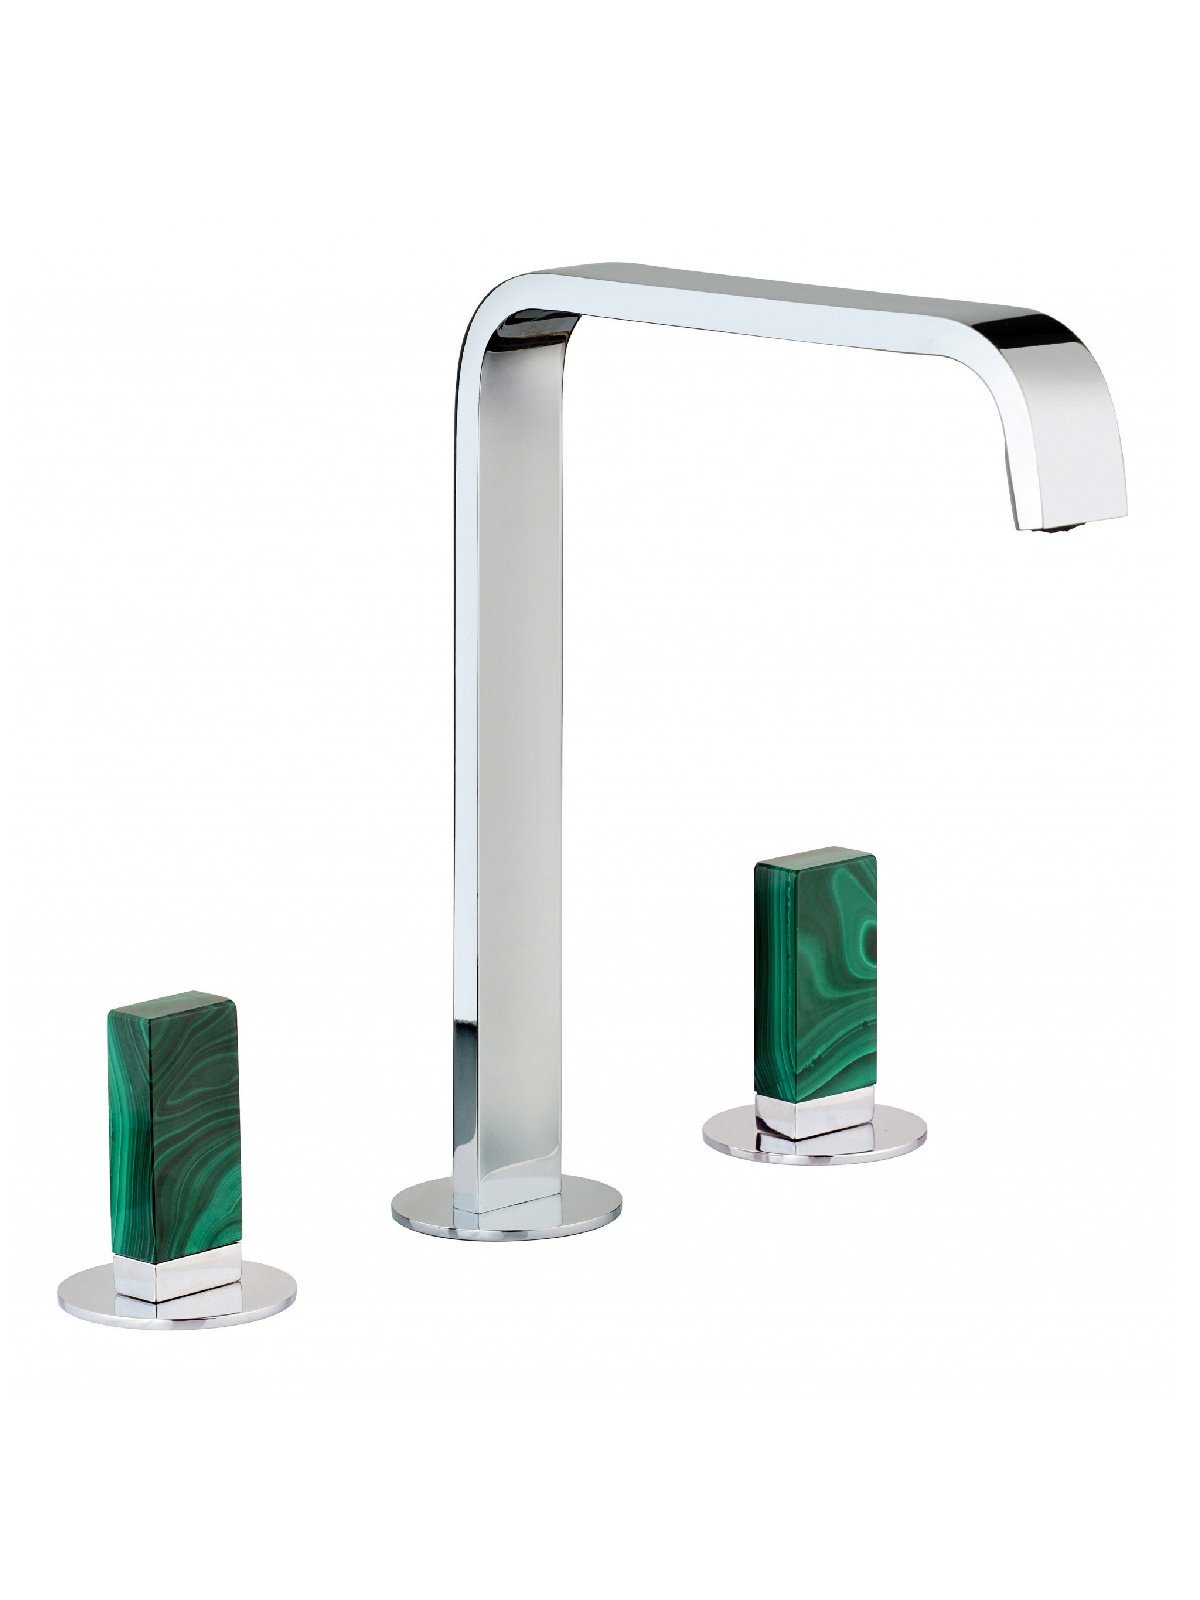 3-hole washbasin mixer with fixed spout without pop-up waste